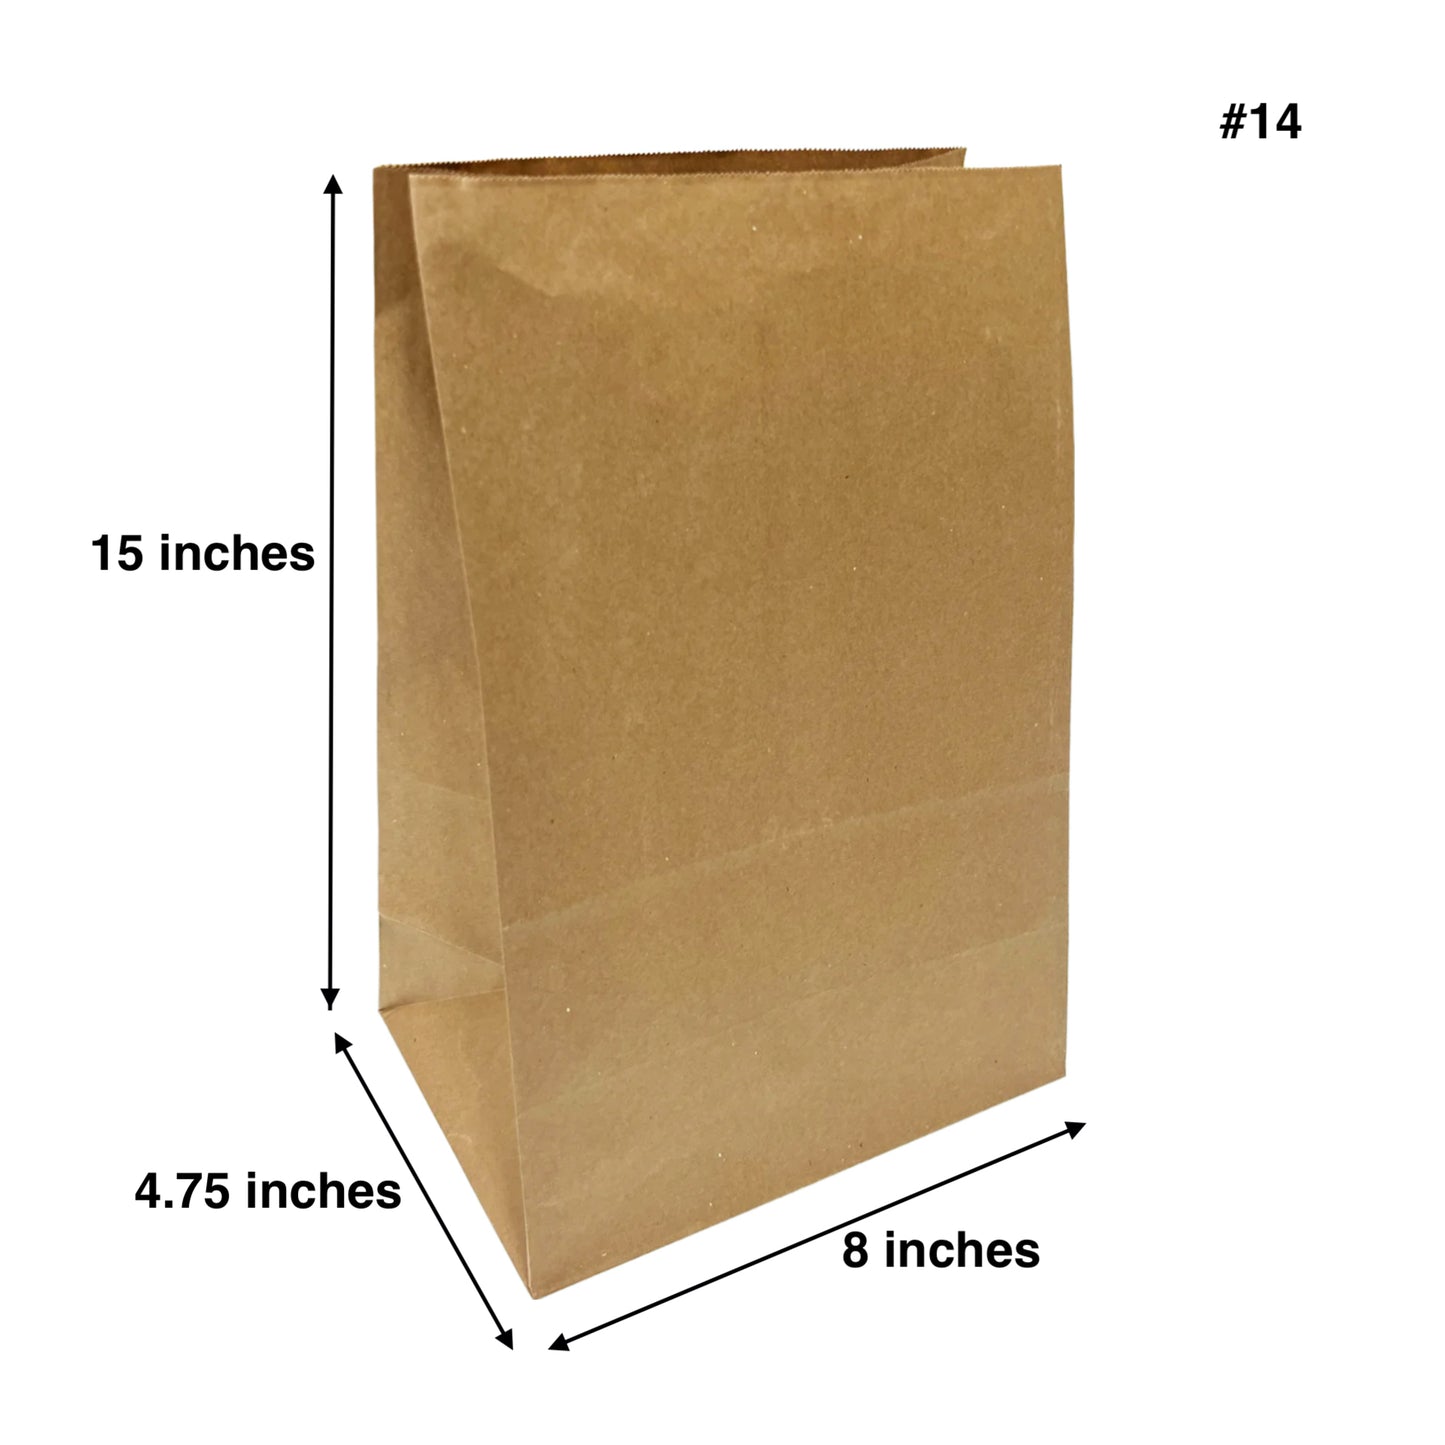 500pcs #14 Grocery Bags 8x4.75x15 inches; $0.06/pc